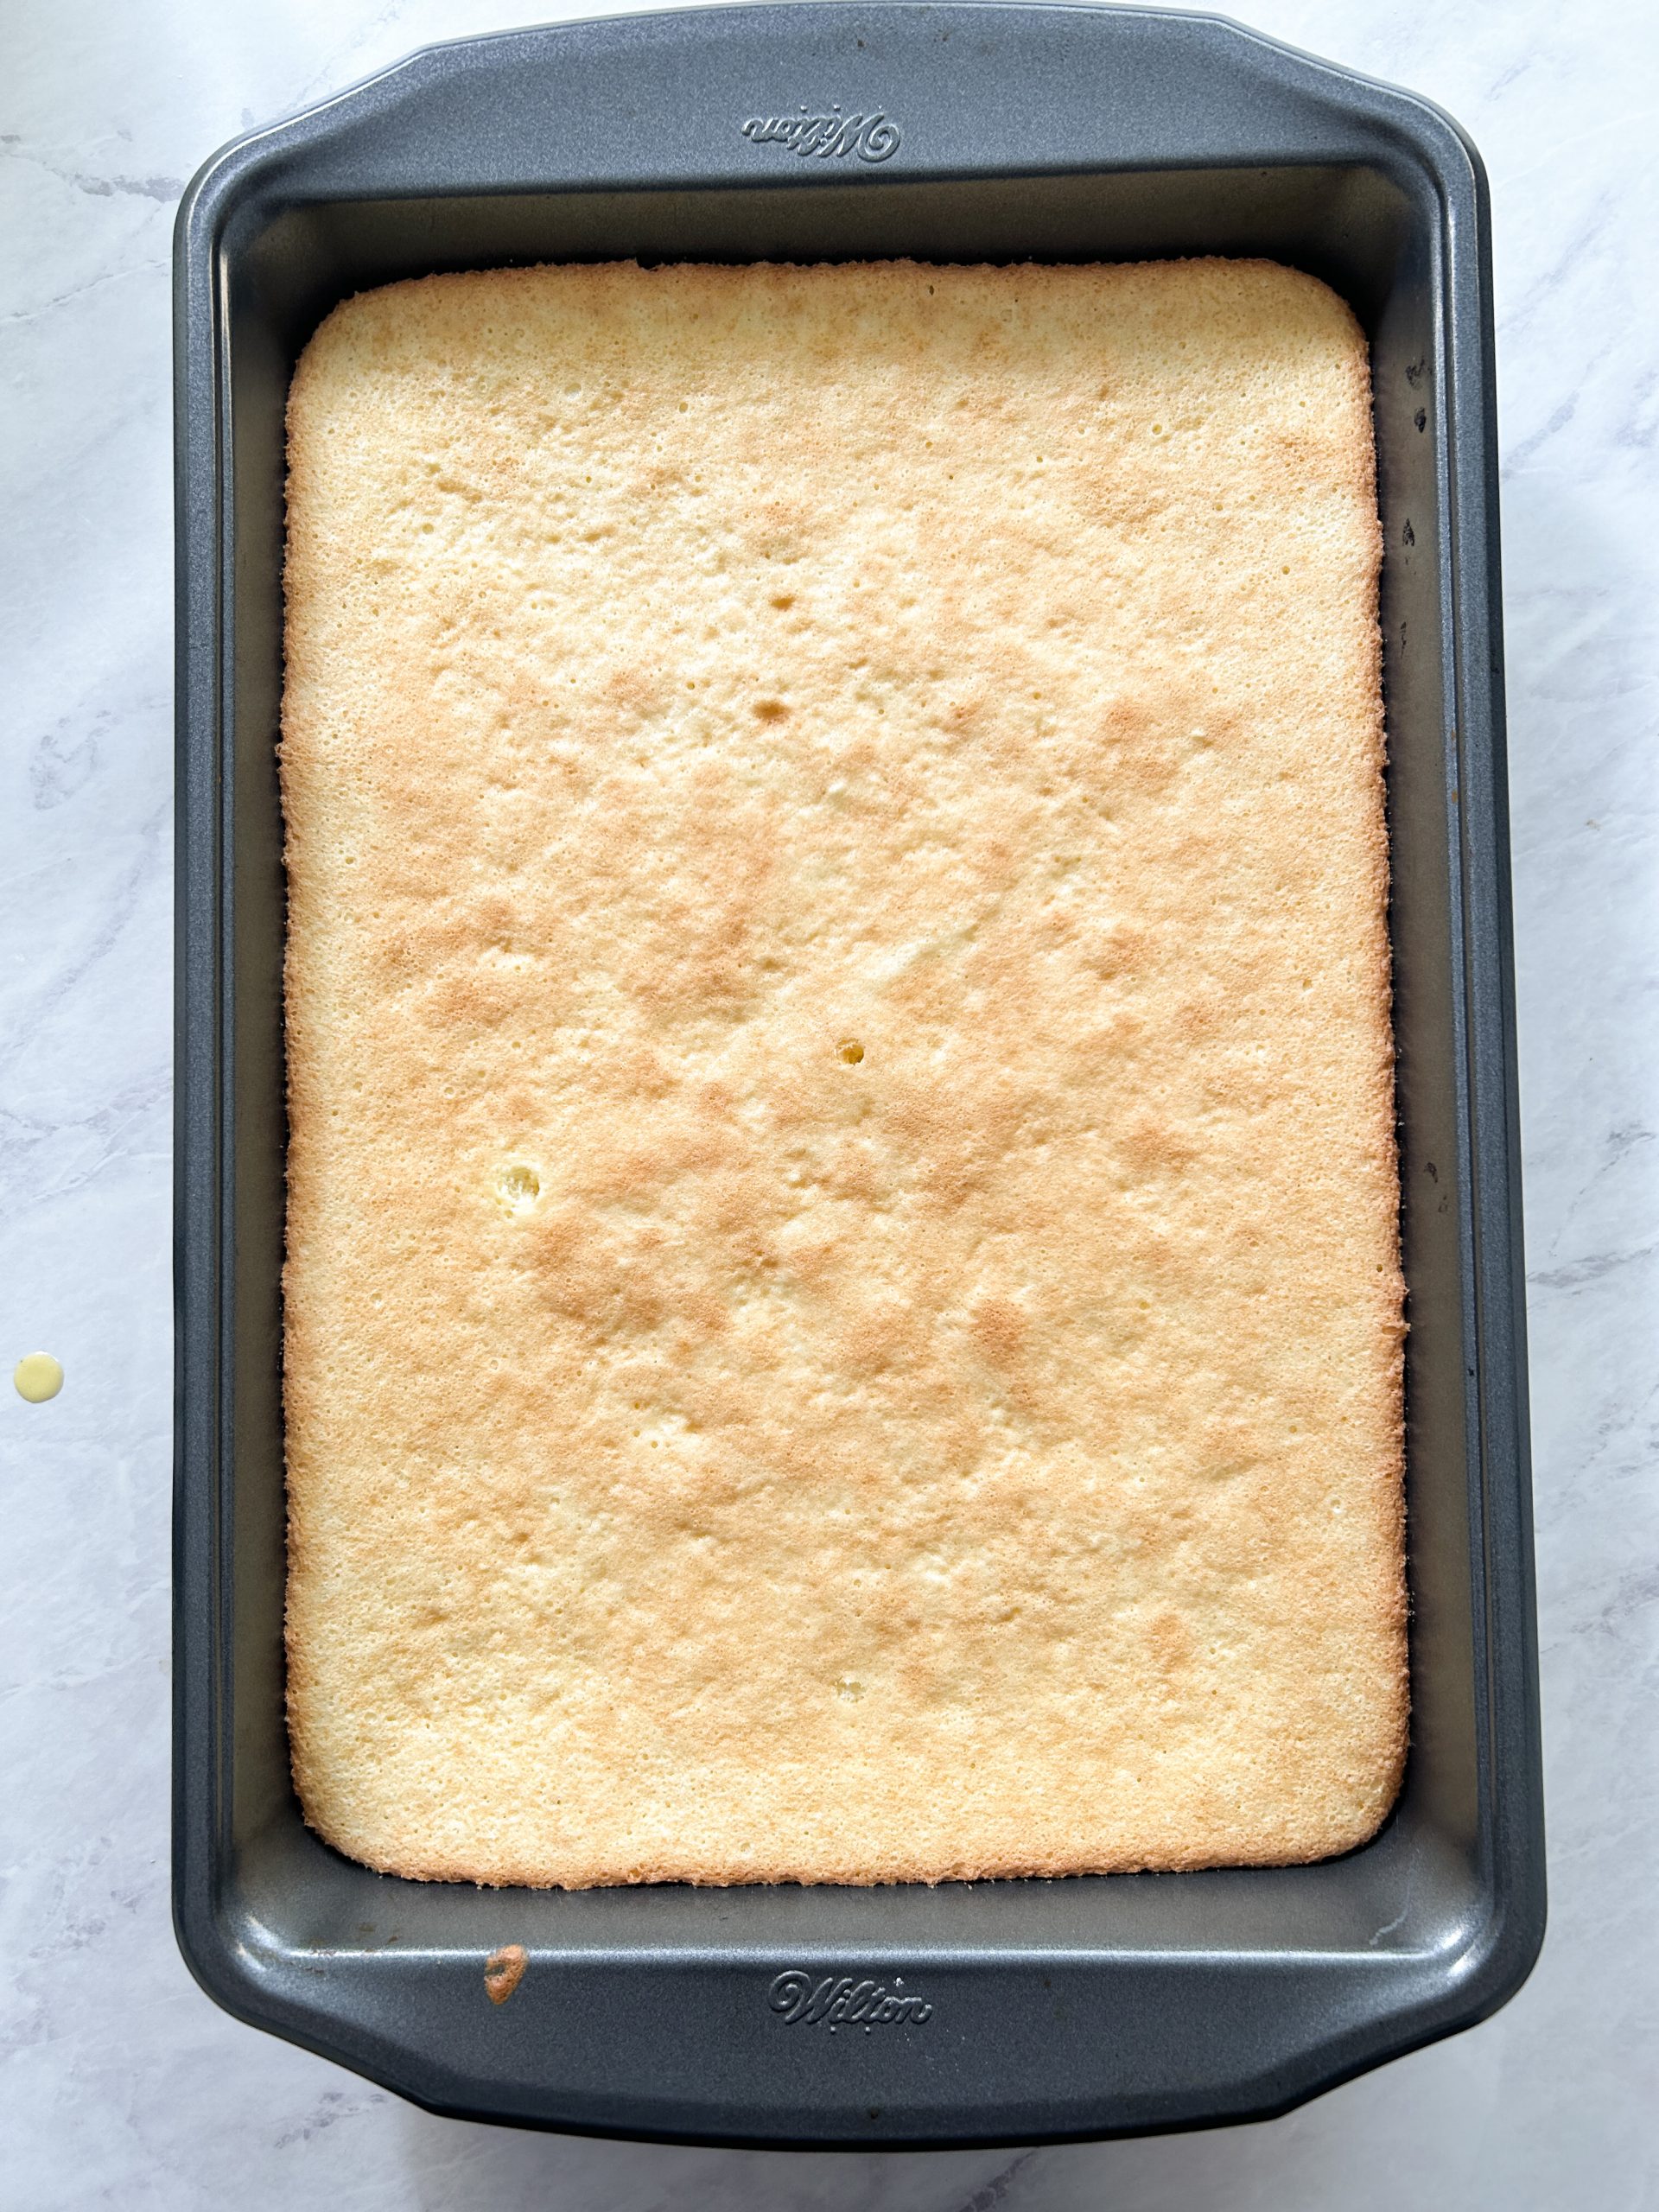 biscuit cake sponge in a pan